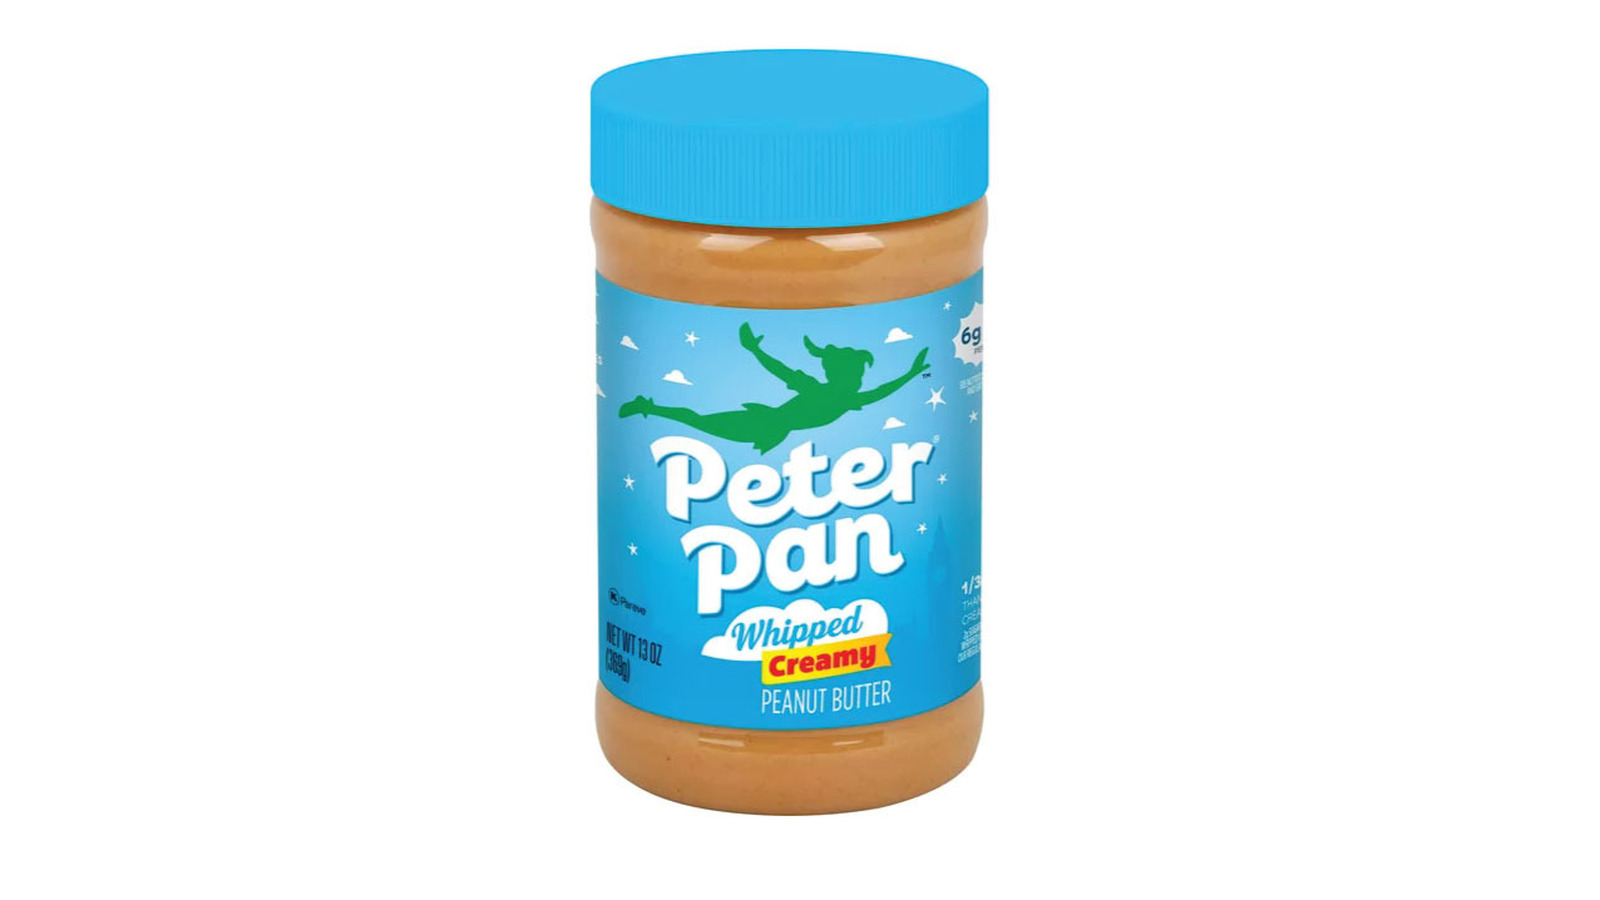 Whatever Happened To Peter Pan's Whipped Peanut Butter?